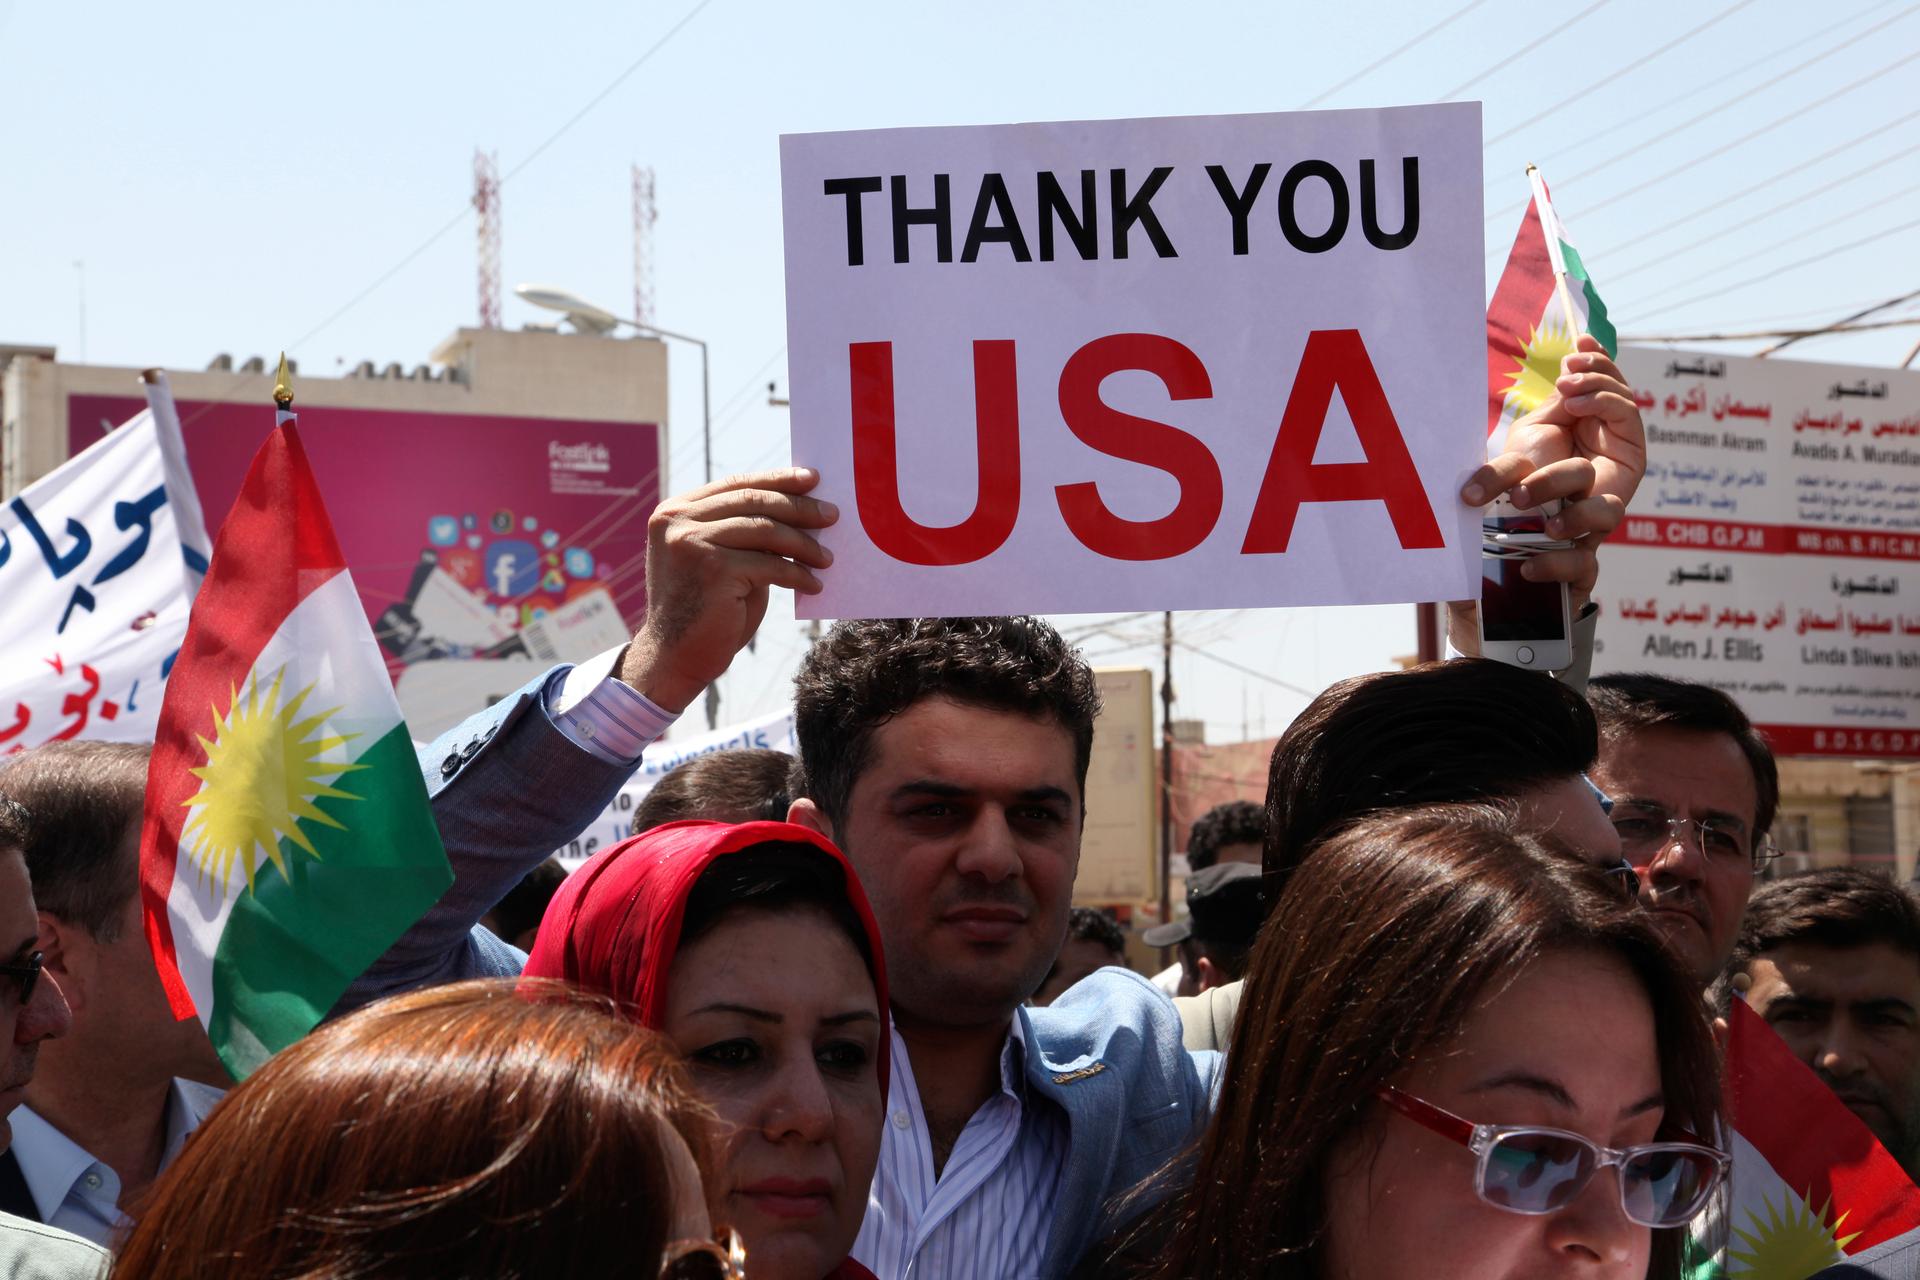 A Kurdish resident holds a signs during a demonstration in support of peshmerga troops in front of the US consulate in Erbil, Iraq.